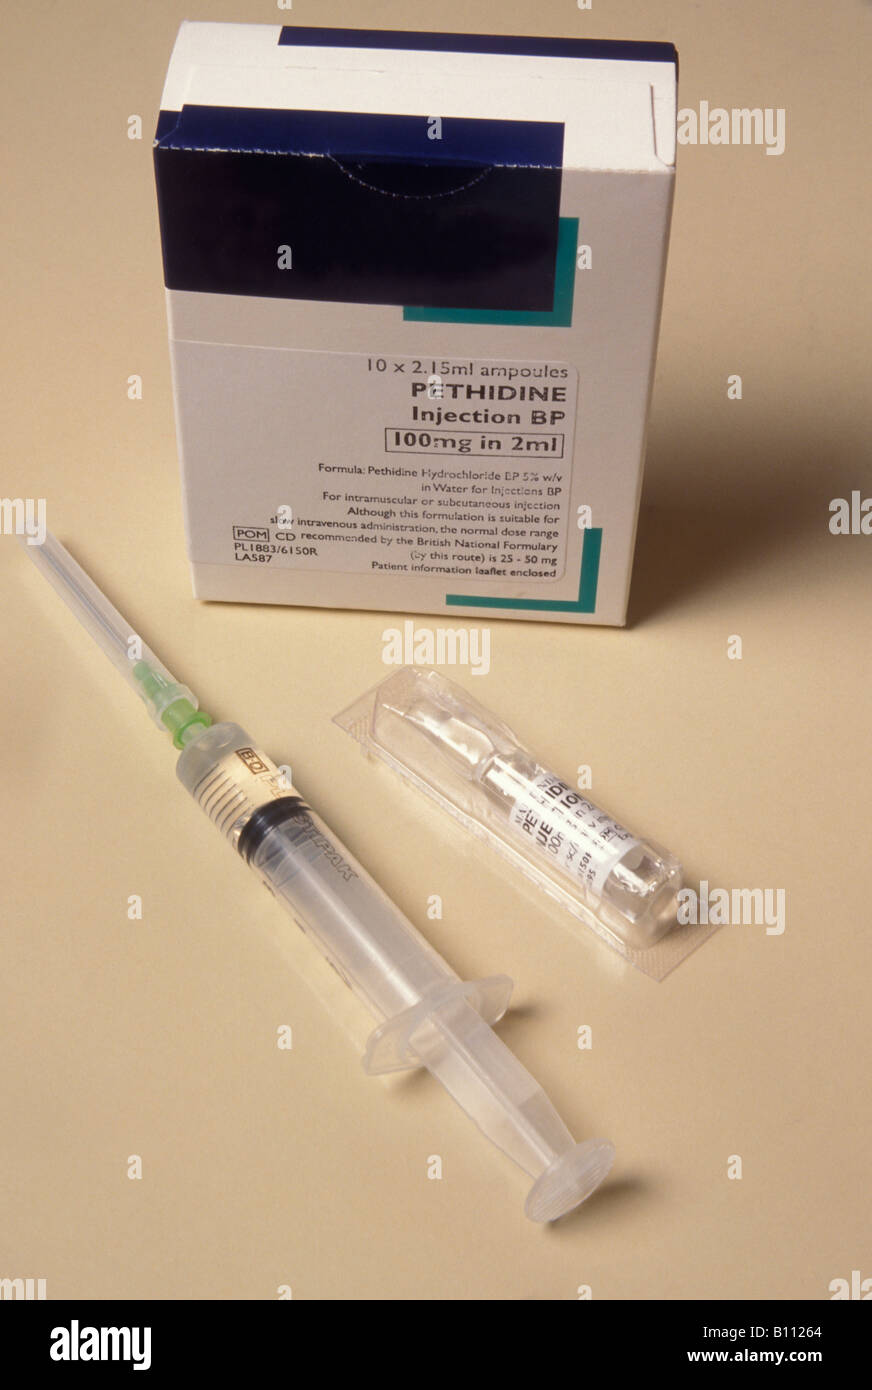 pethidin injection for pain relief during labour Stock Photo